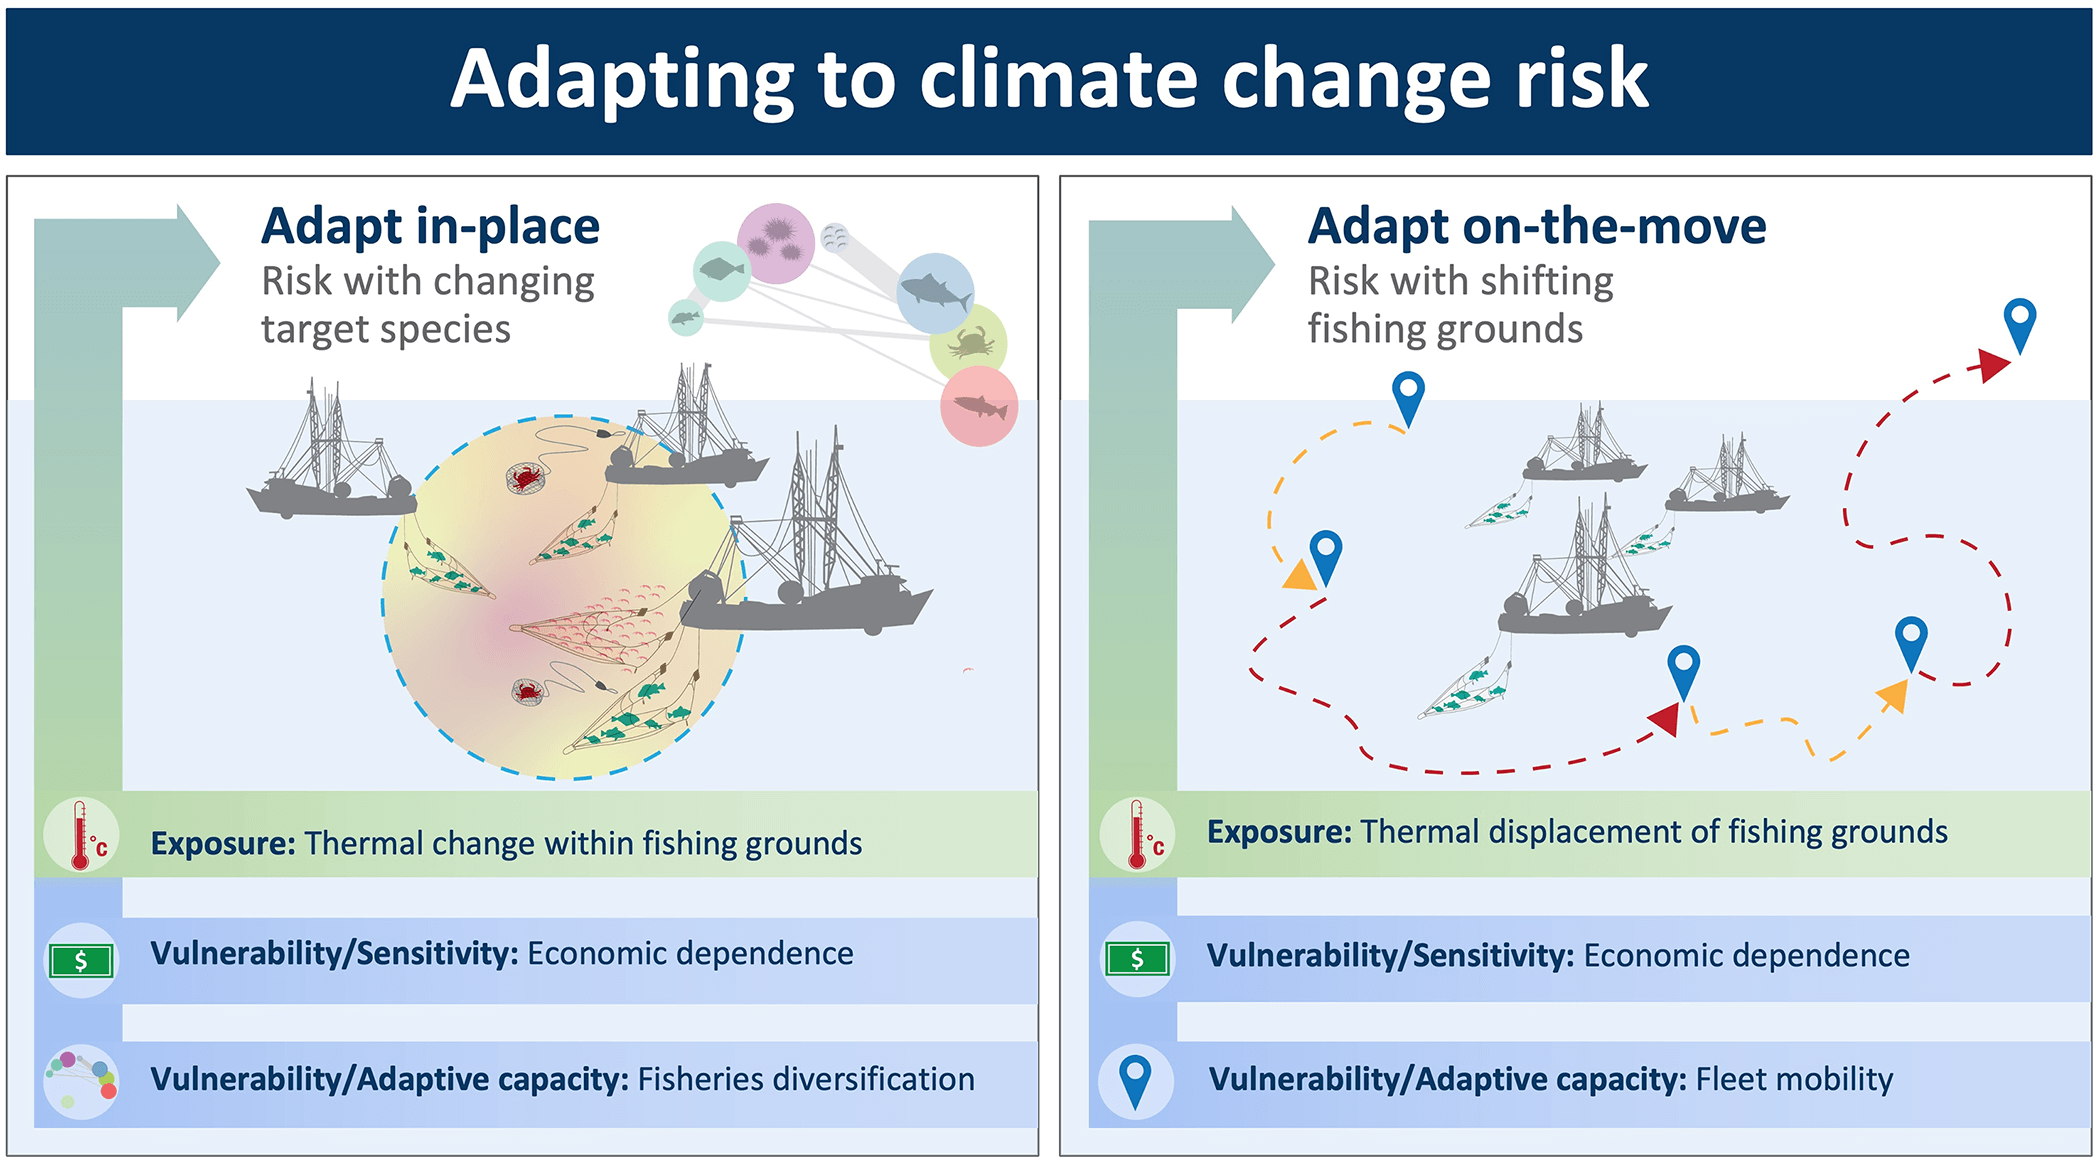 Conceptual framework for adapting to climate change risk